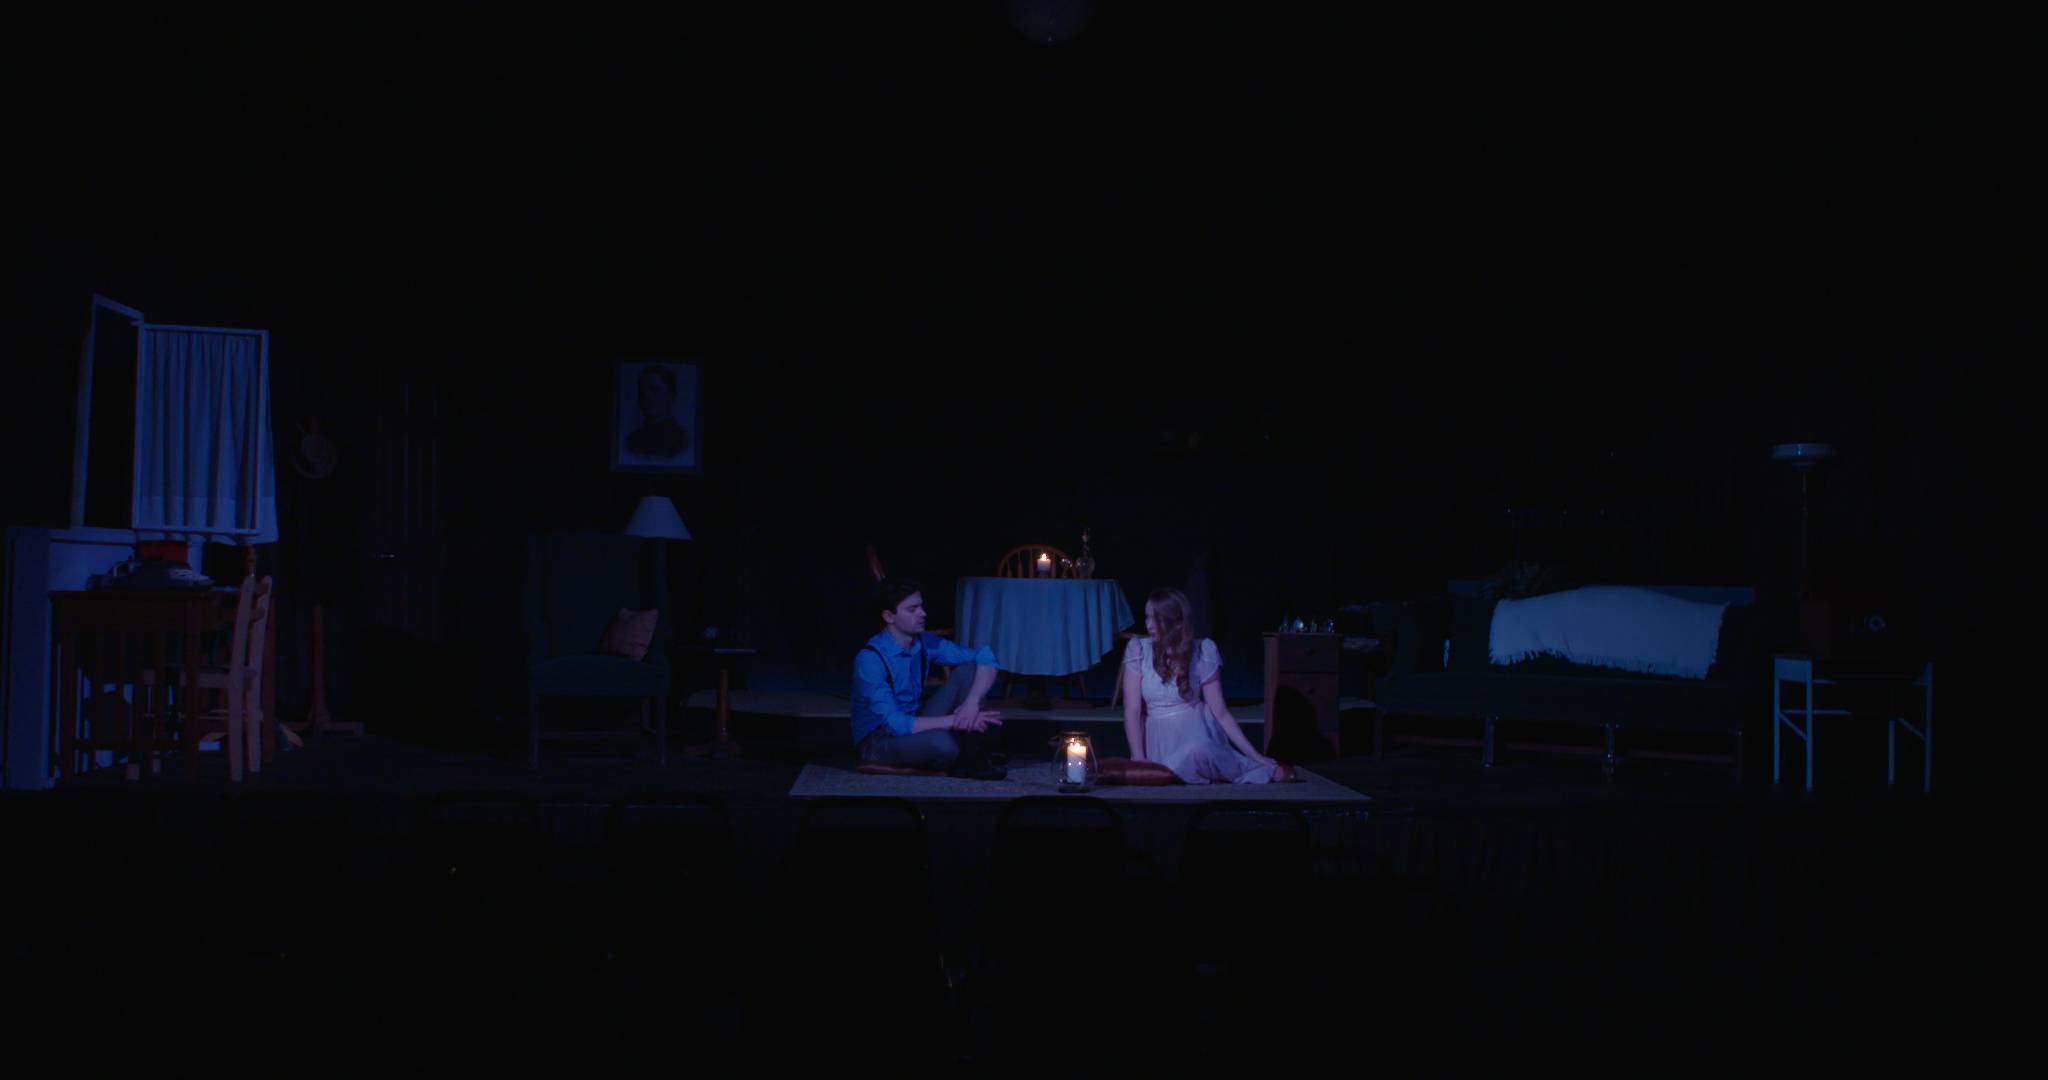 The Glass Menagerie finds the beauty in memories past